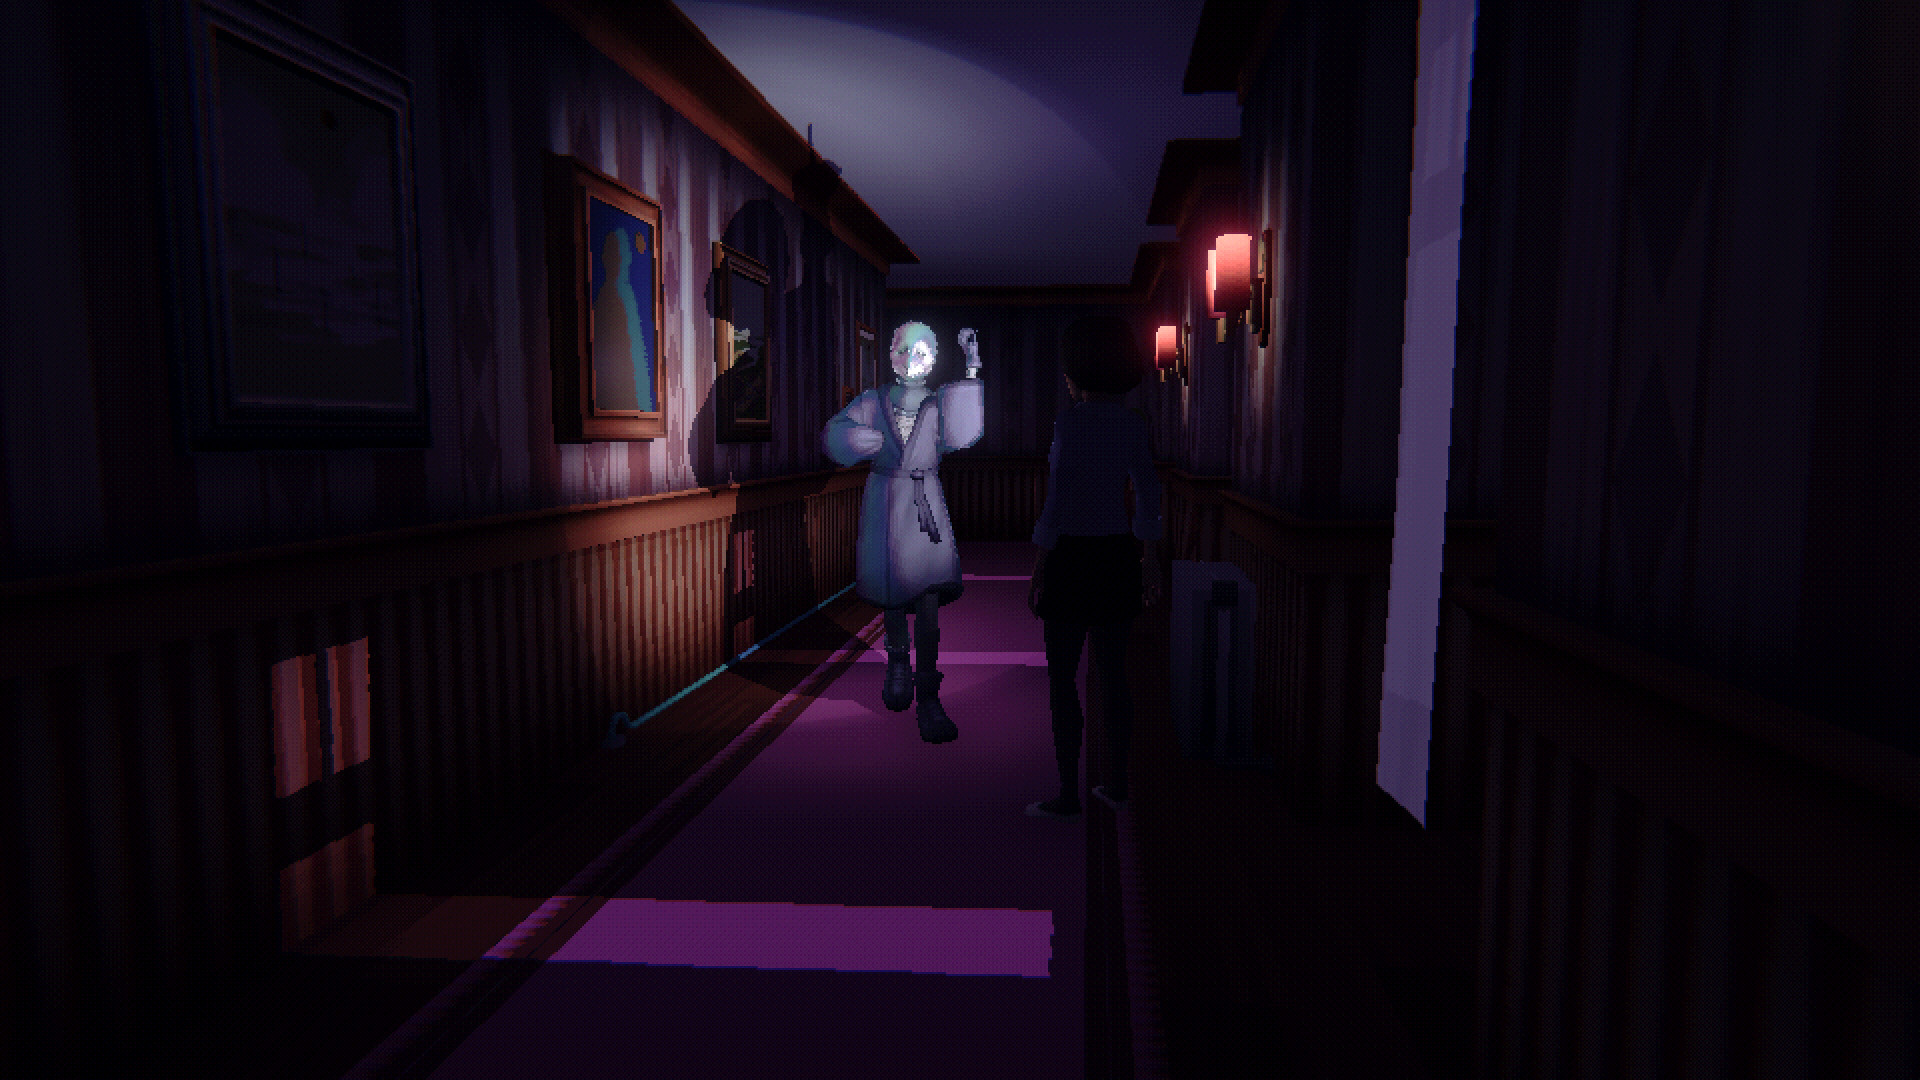 The killer in Homebody, a robed and masked figure using a knife, approaches the player.